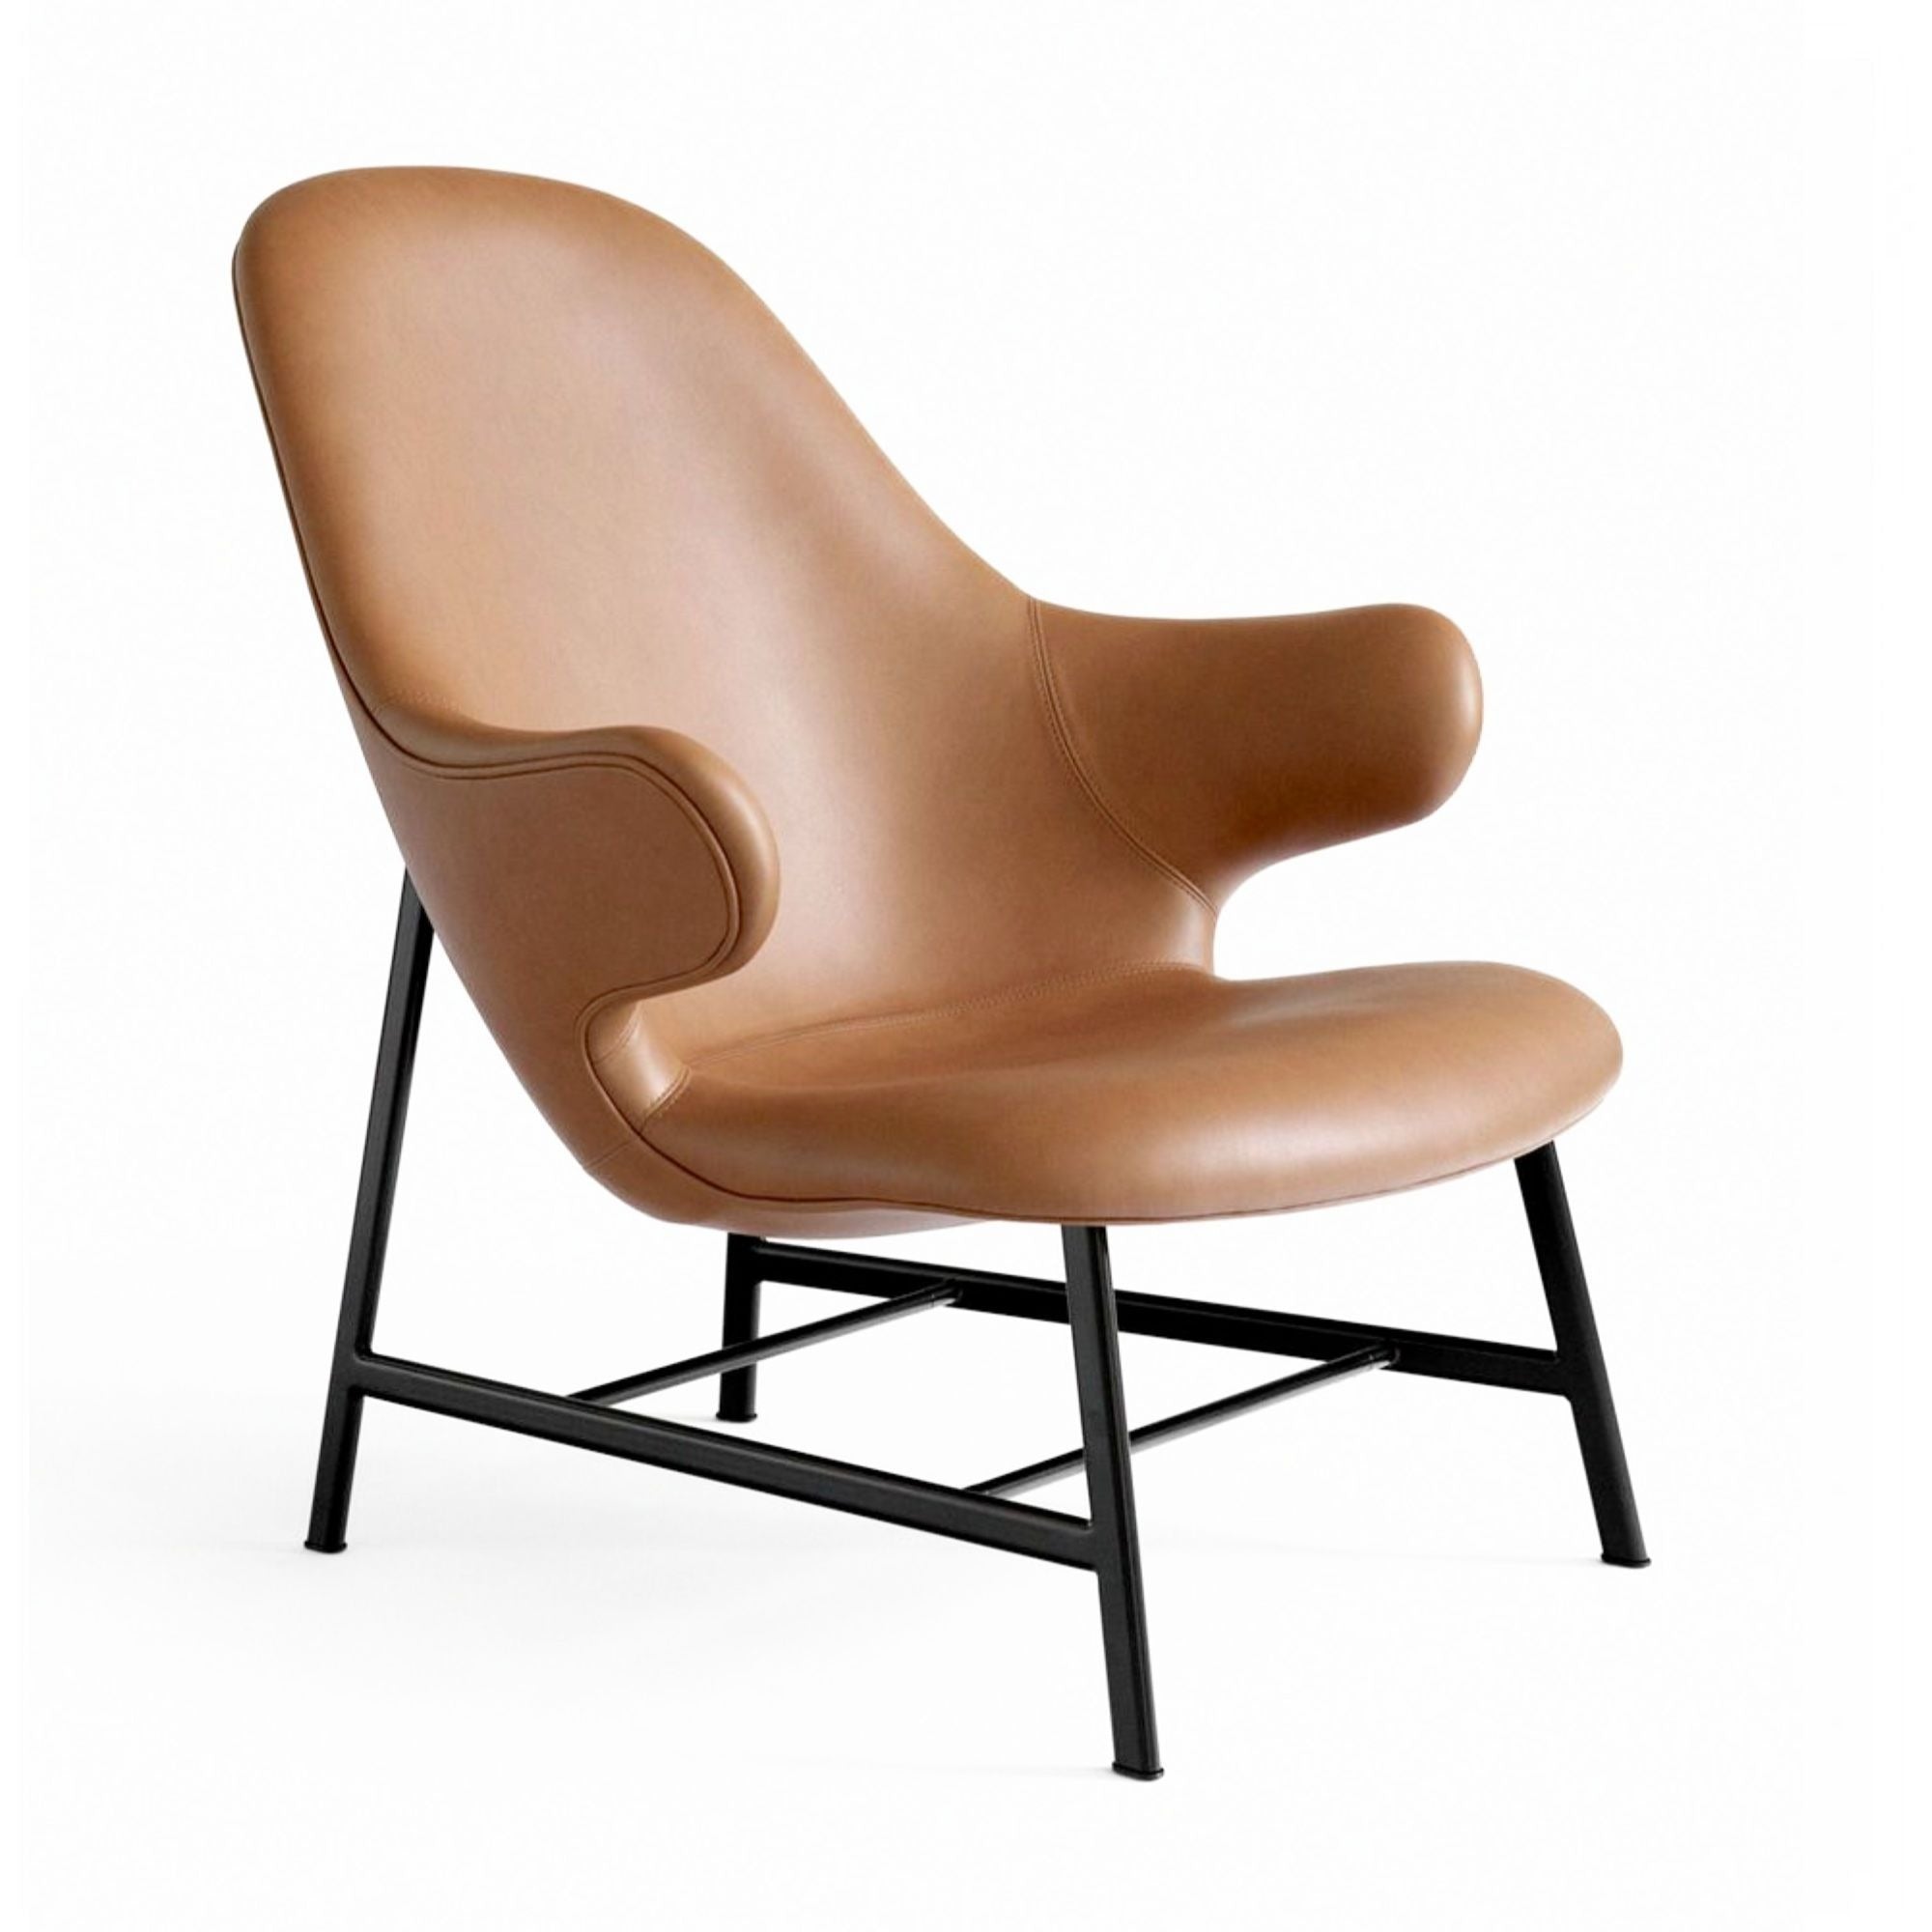 &Tradition Catch JH13 lounge chair, cognac leather (CA-MO Silk Aniline Leather)